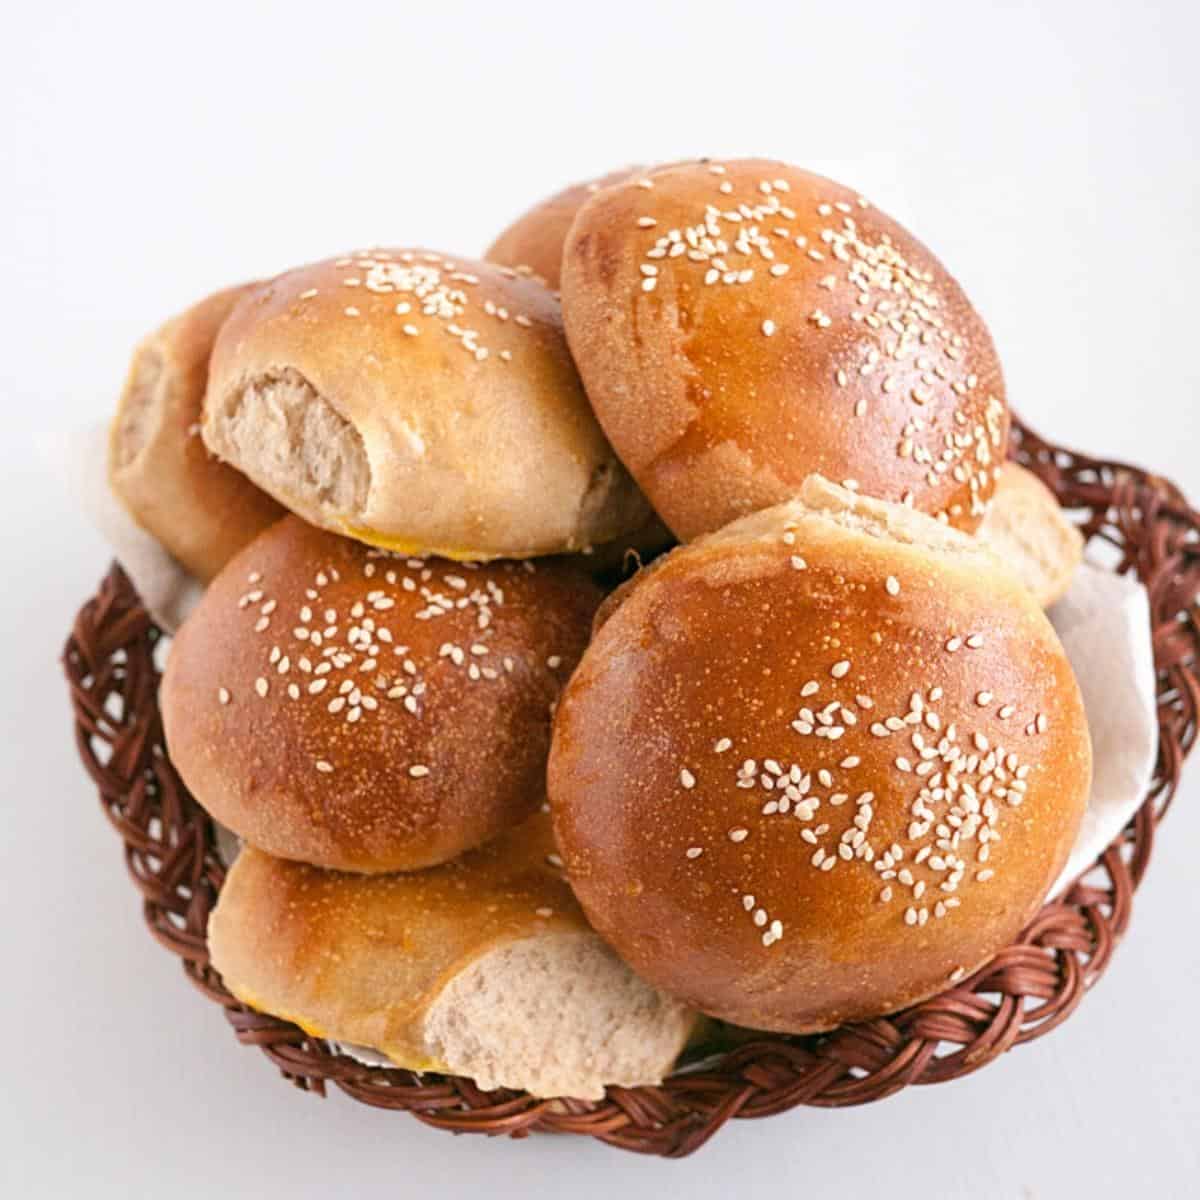 A basket with whole wheat buns.